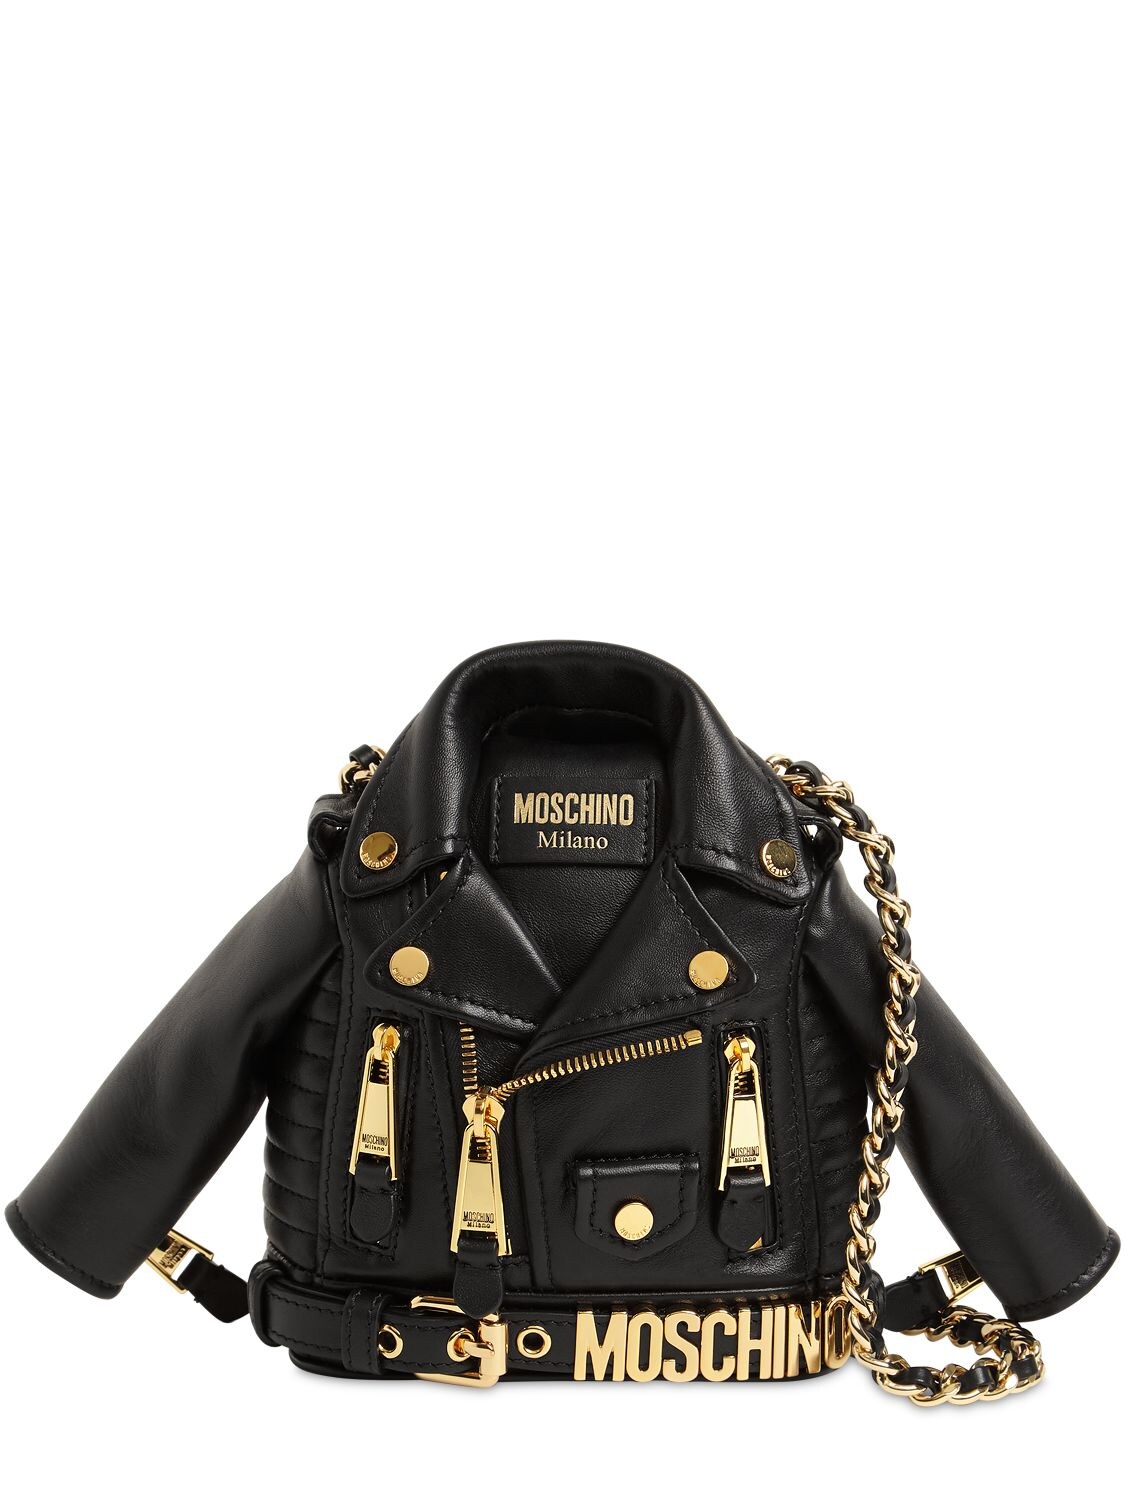 moschino leather shoulder bag